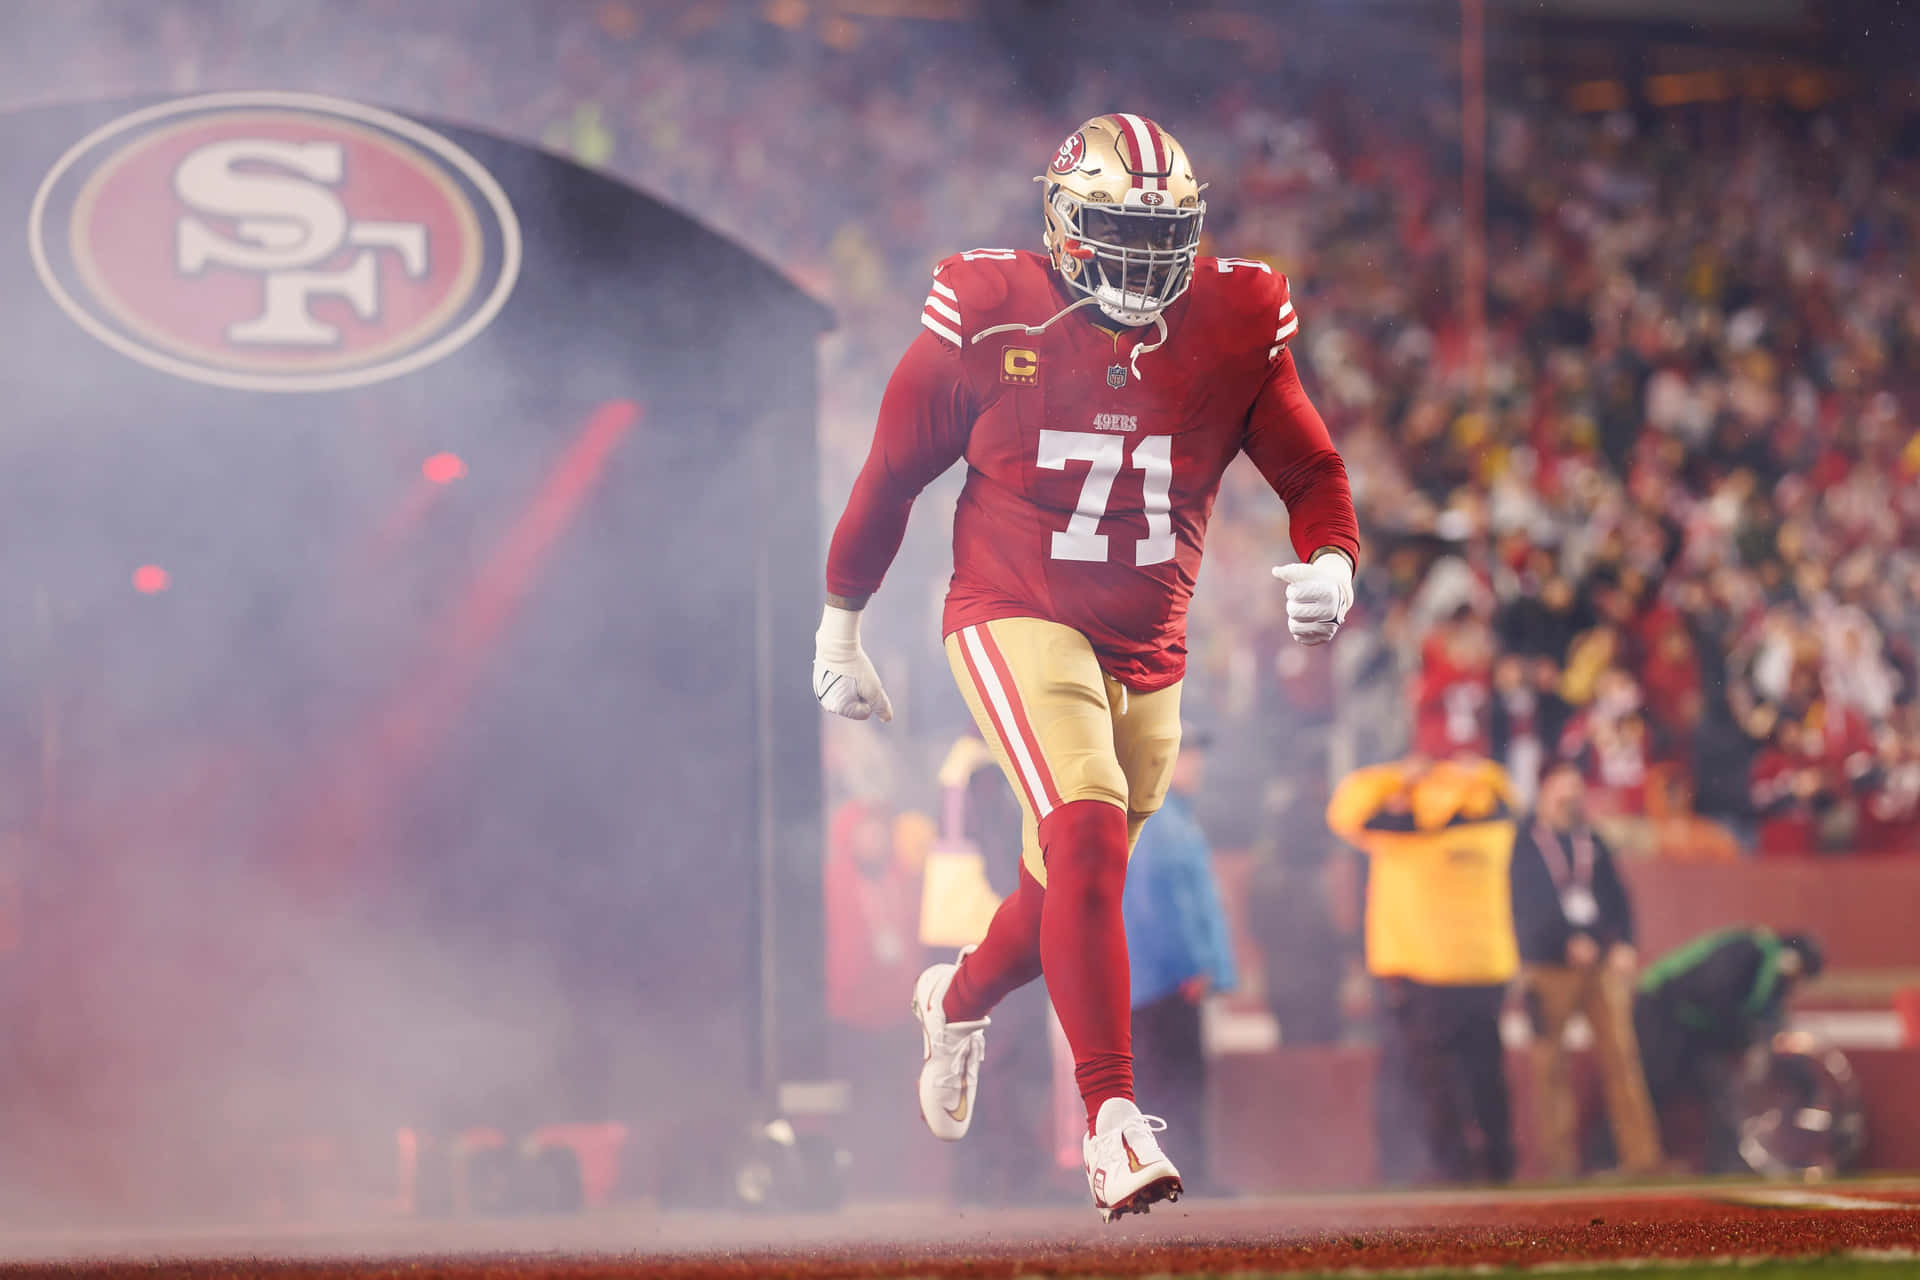 San Francisco49ers Player Number71in Action.jpg Wallpaper